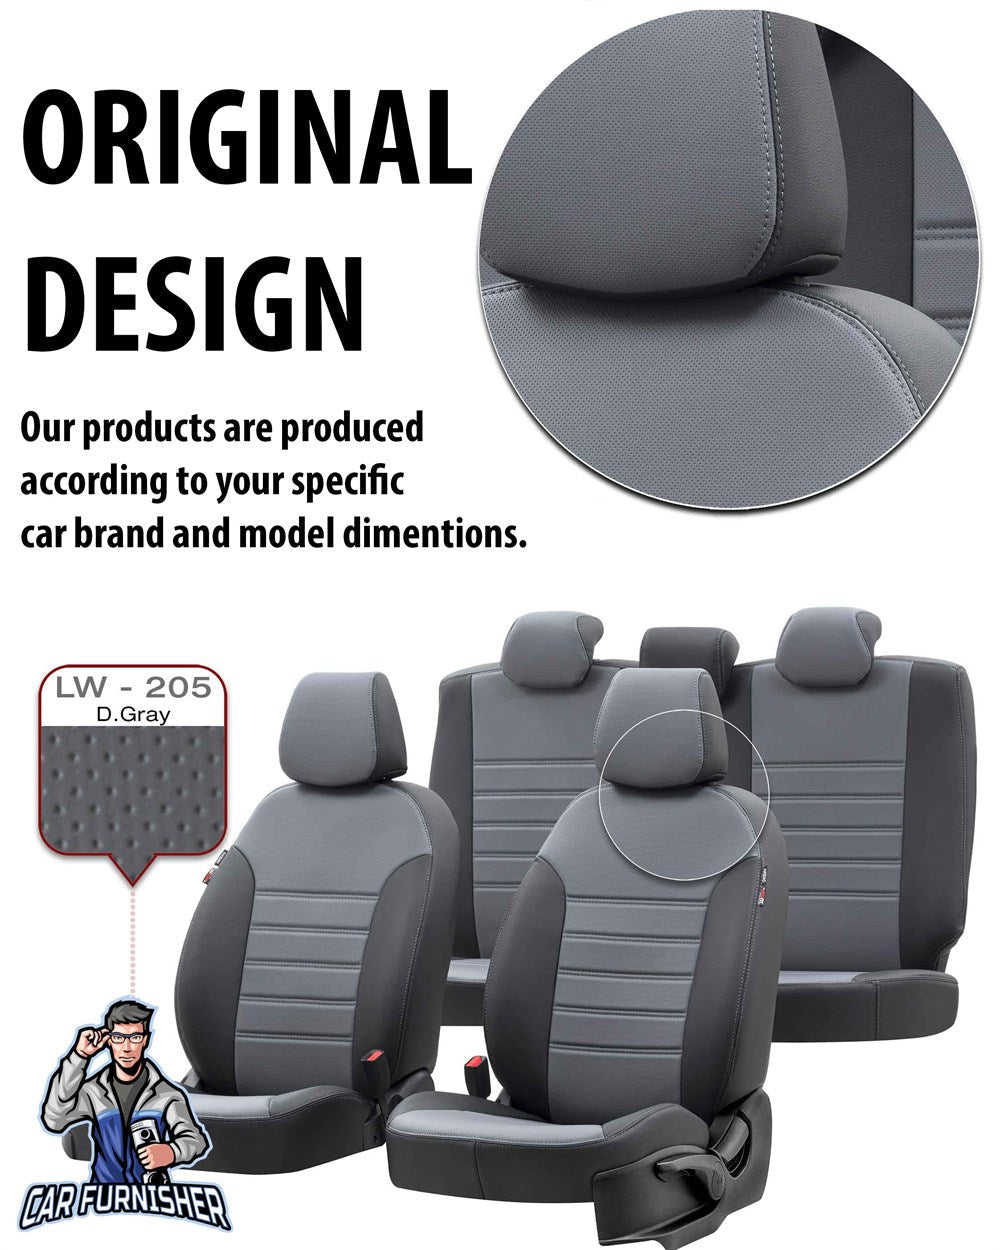 Fiat Stilo Seat Covers Istanbul Leather Design Smoked Black Leather